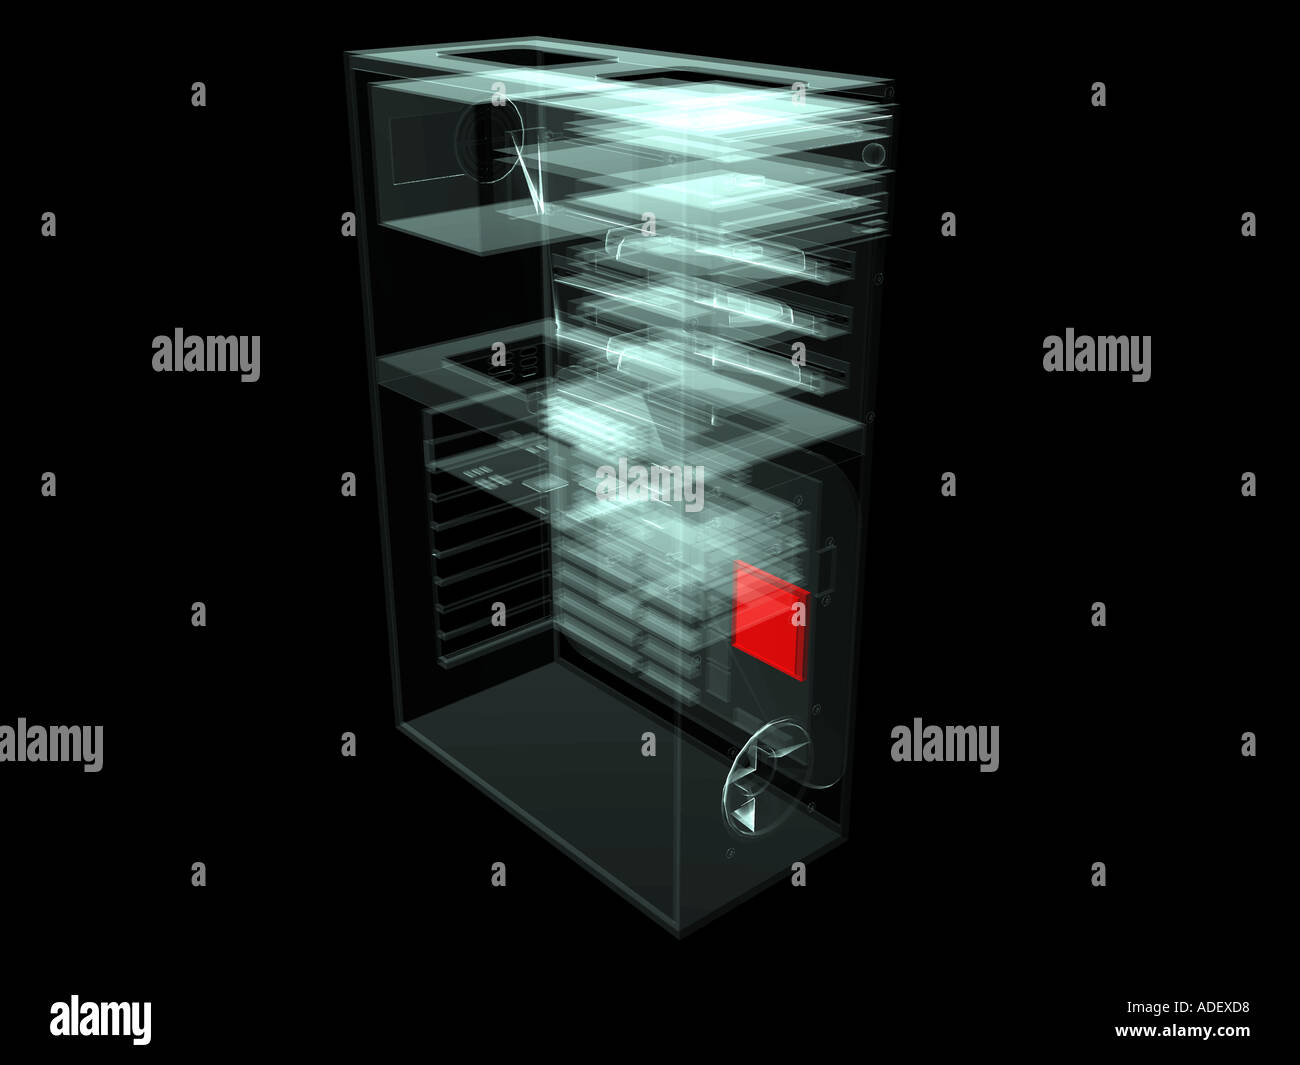 xray style computer illustration of a PC showing the location of the processor or cpu Stock Photo